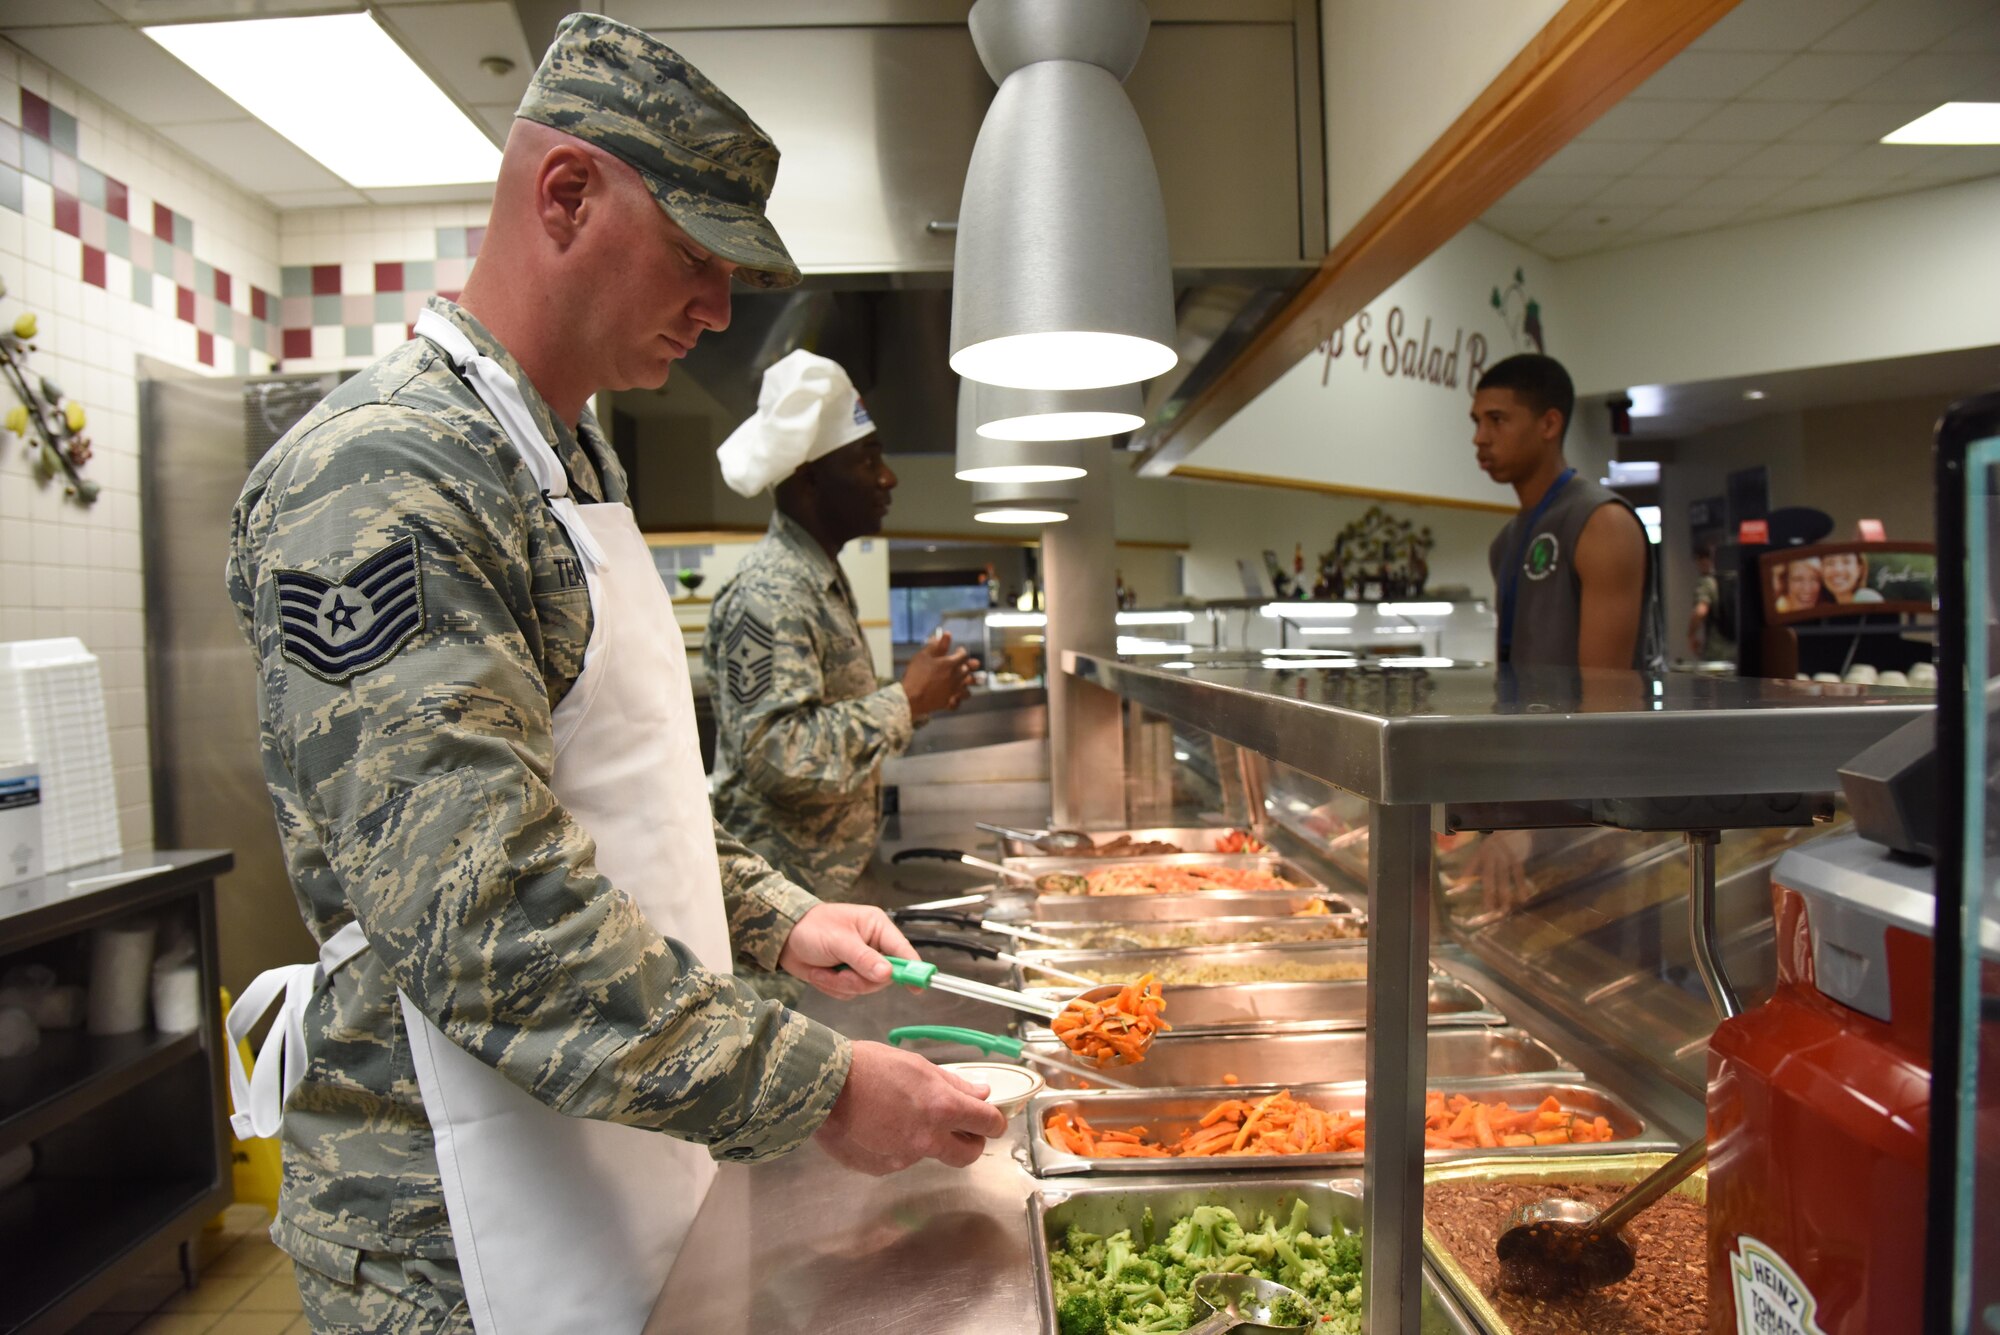 Tech. Sgt. Brian Teachout, 81st Logistics Readiness Squadron small air terminal NCO in charge, serves Airmen food at the Azalea Dining Facility April 11, 2017, on Keesler Air Force Base, Miss. He participated in the Command Chief for a Day program which highlights outstanding enlisted performers from around the wing. Each Airman selected for the program spends the day shadowing Chief Master Sgt. Vegas Clark, 81st Training Wing command chief, to learn what it takes to be a command chief. (U.S. Air Force photo by Kemberly Groue)